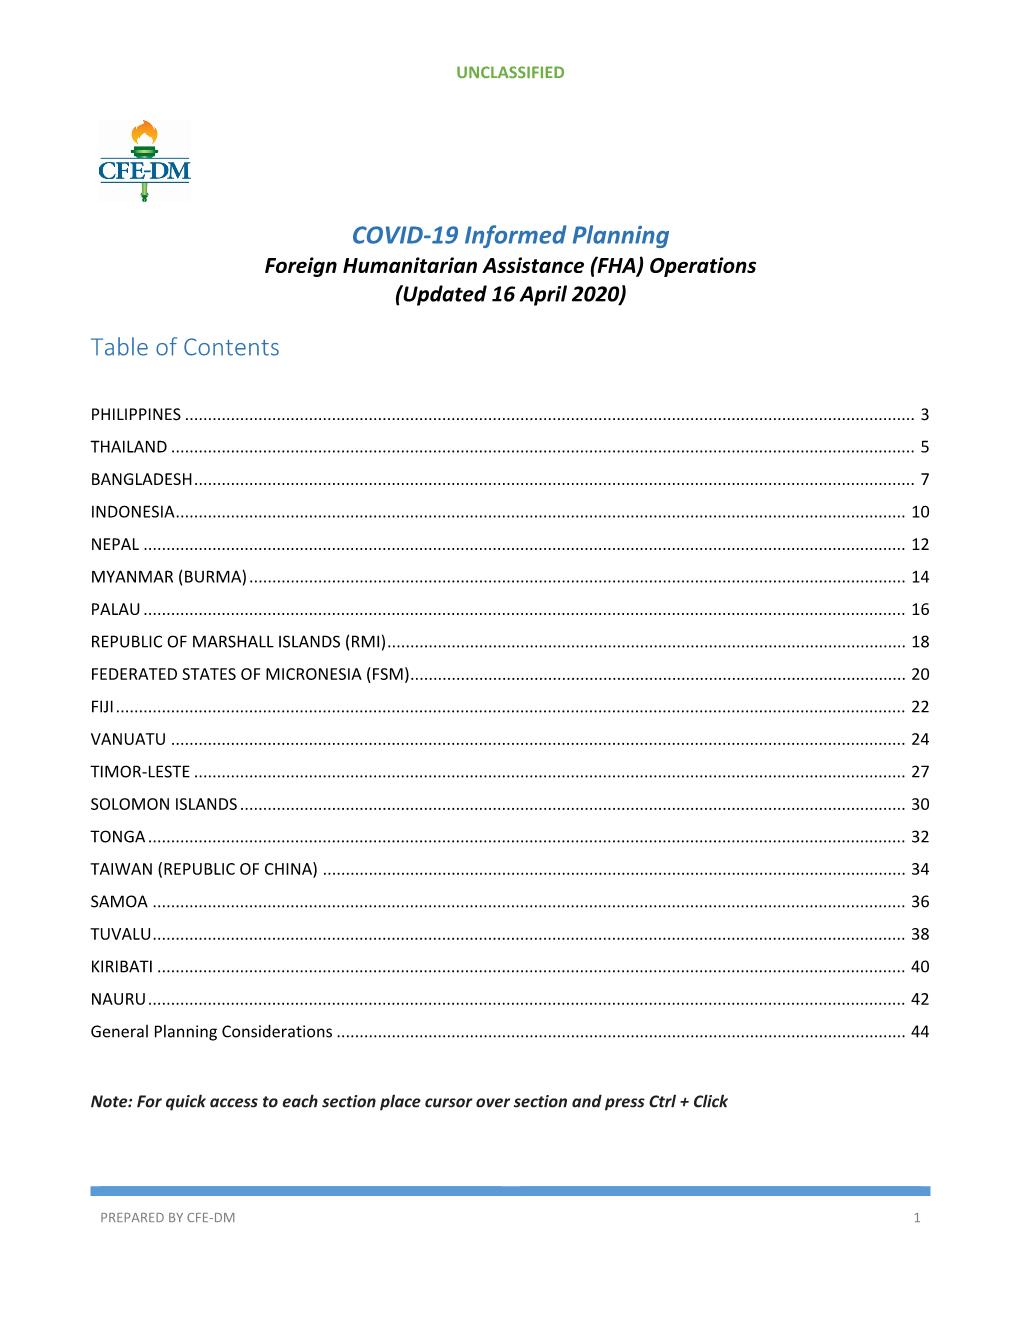 COVID-19 Informed Planning Table of Contents